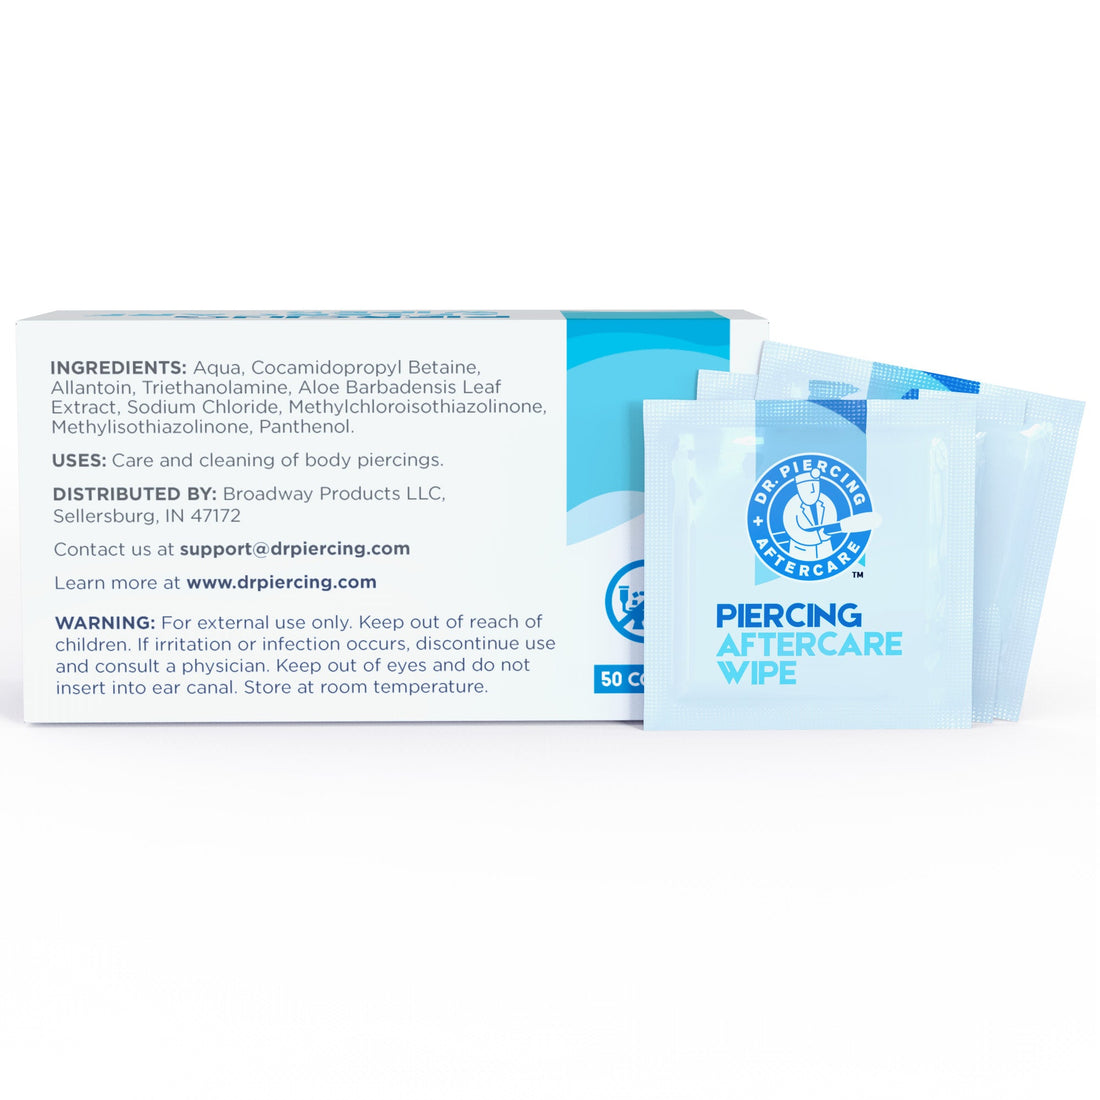 Wipes - Wound Treatments &amp; Skin Relief - Dr. Piercing Aftercare